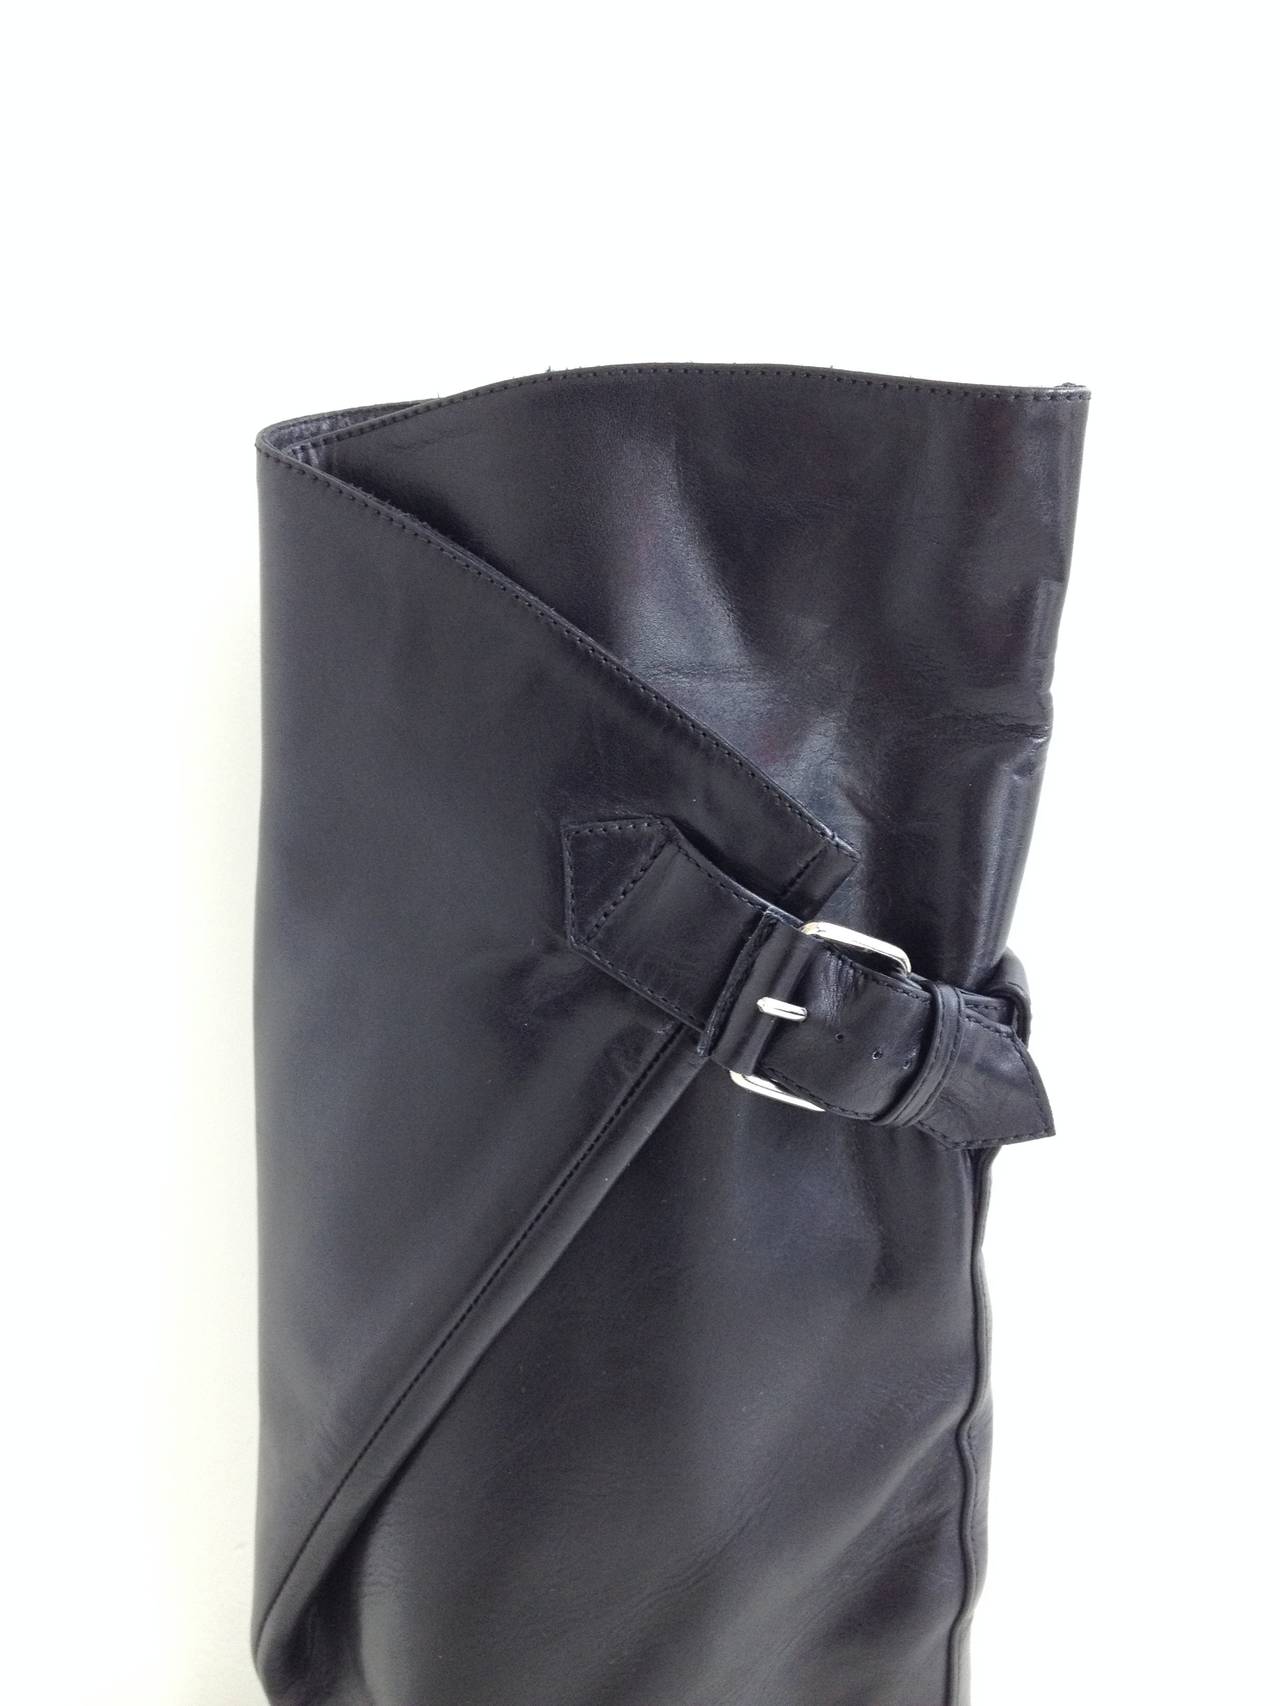 These boots are for the bold. With a striking architectural build, they are a composition of straight lines and sharp angles - the triangular 3.75 inch wedge, column shape of the boot shaft, and triangular buckled-down flap at the top. Balenciaga